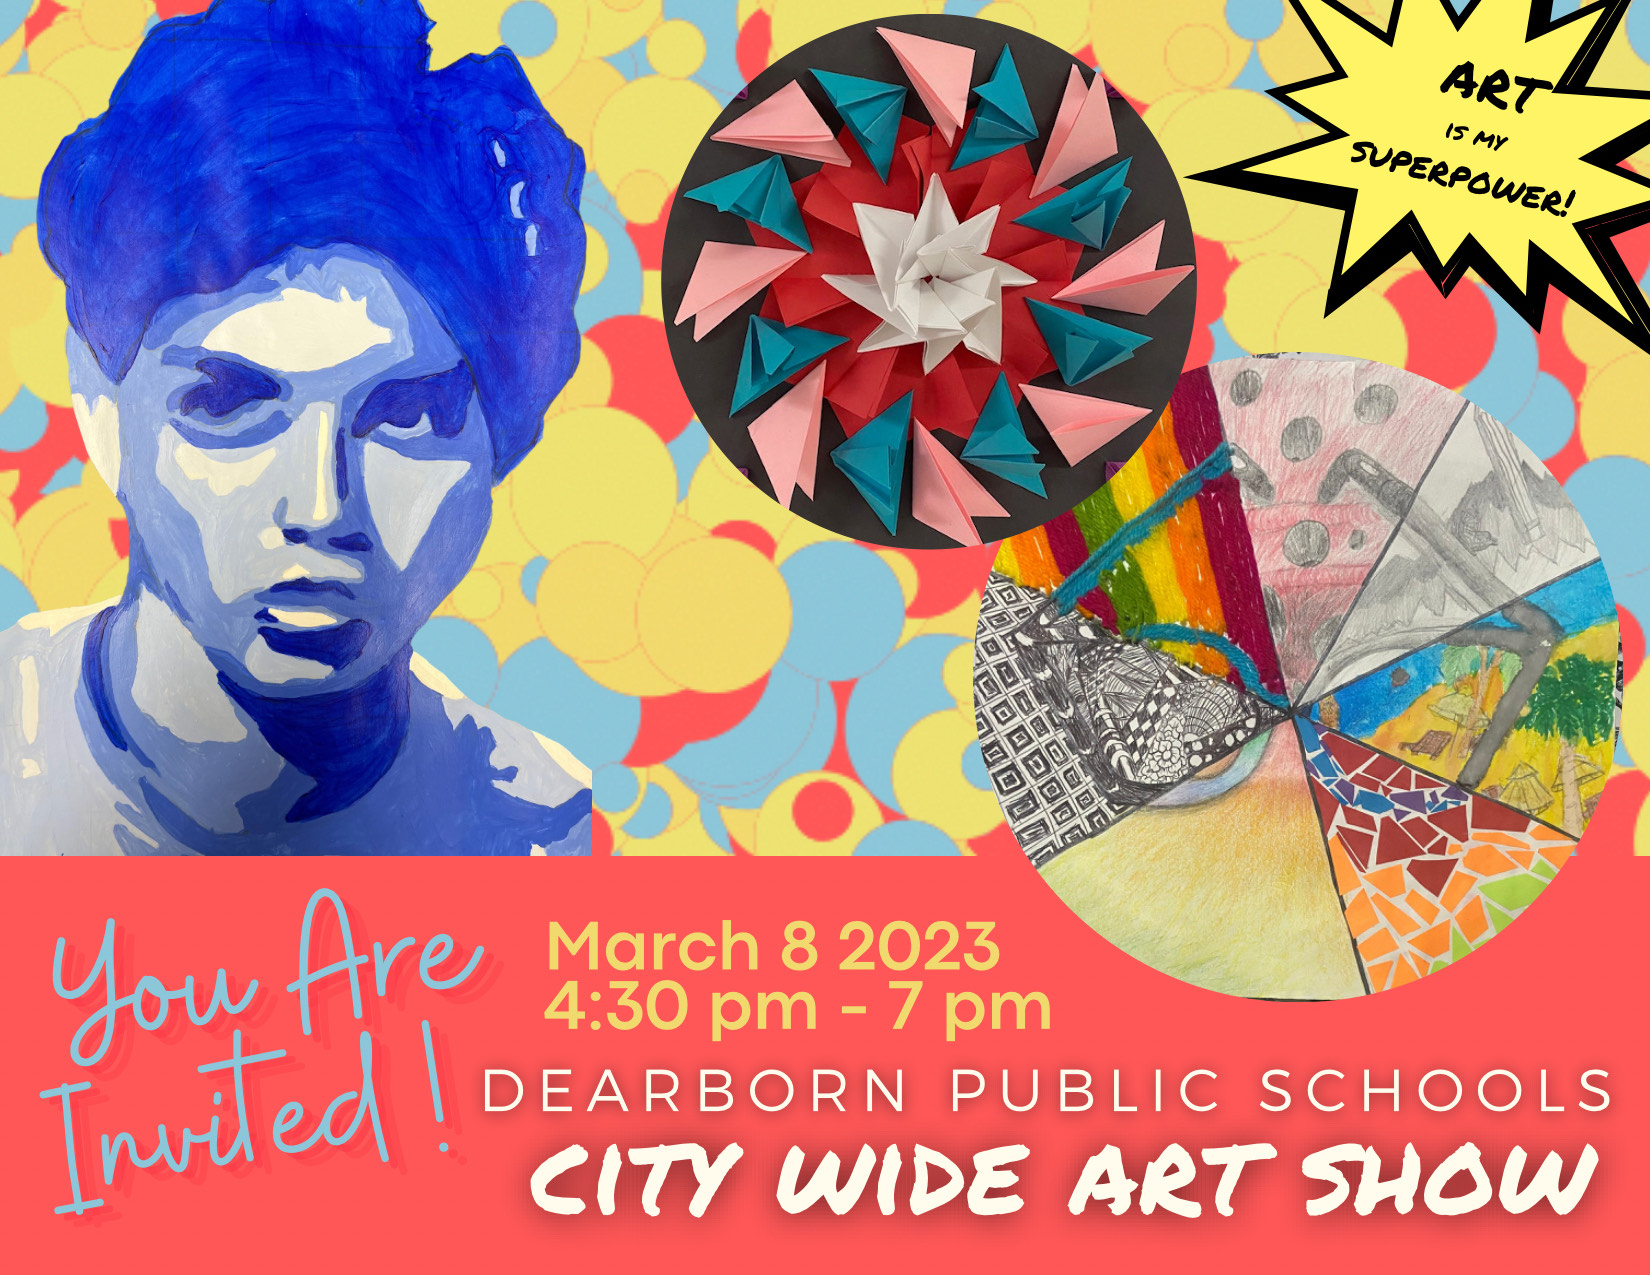 Postcard for the Dearborn Public Schools City Wide Art Show opening reception